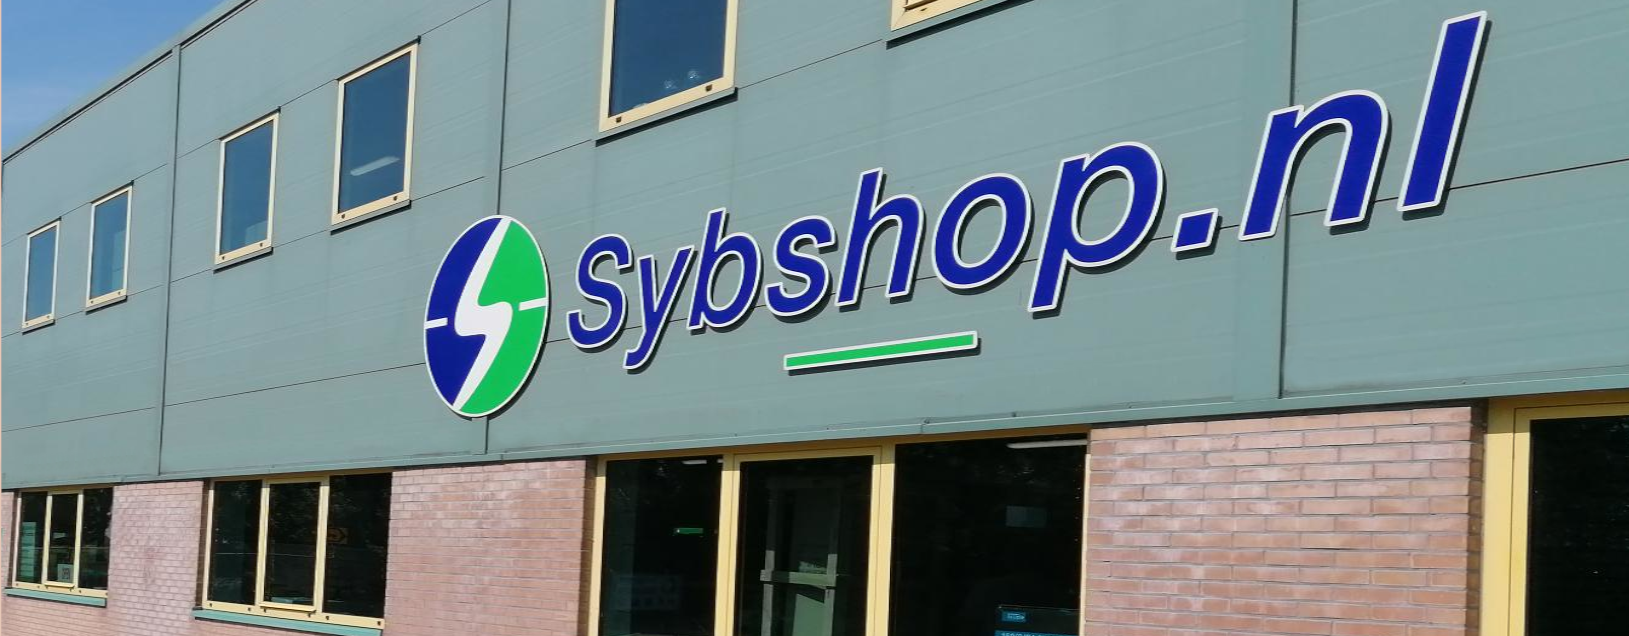 Voorkant pand Sybshop.nl